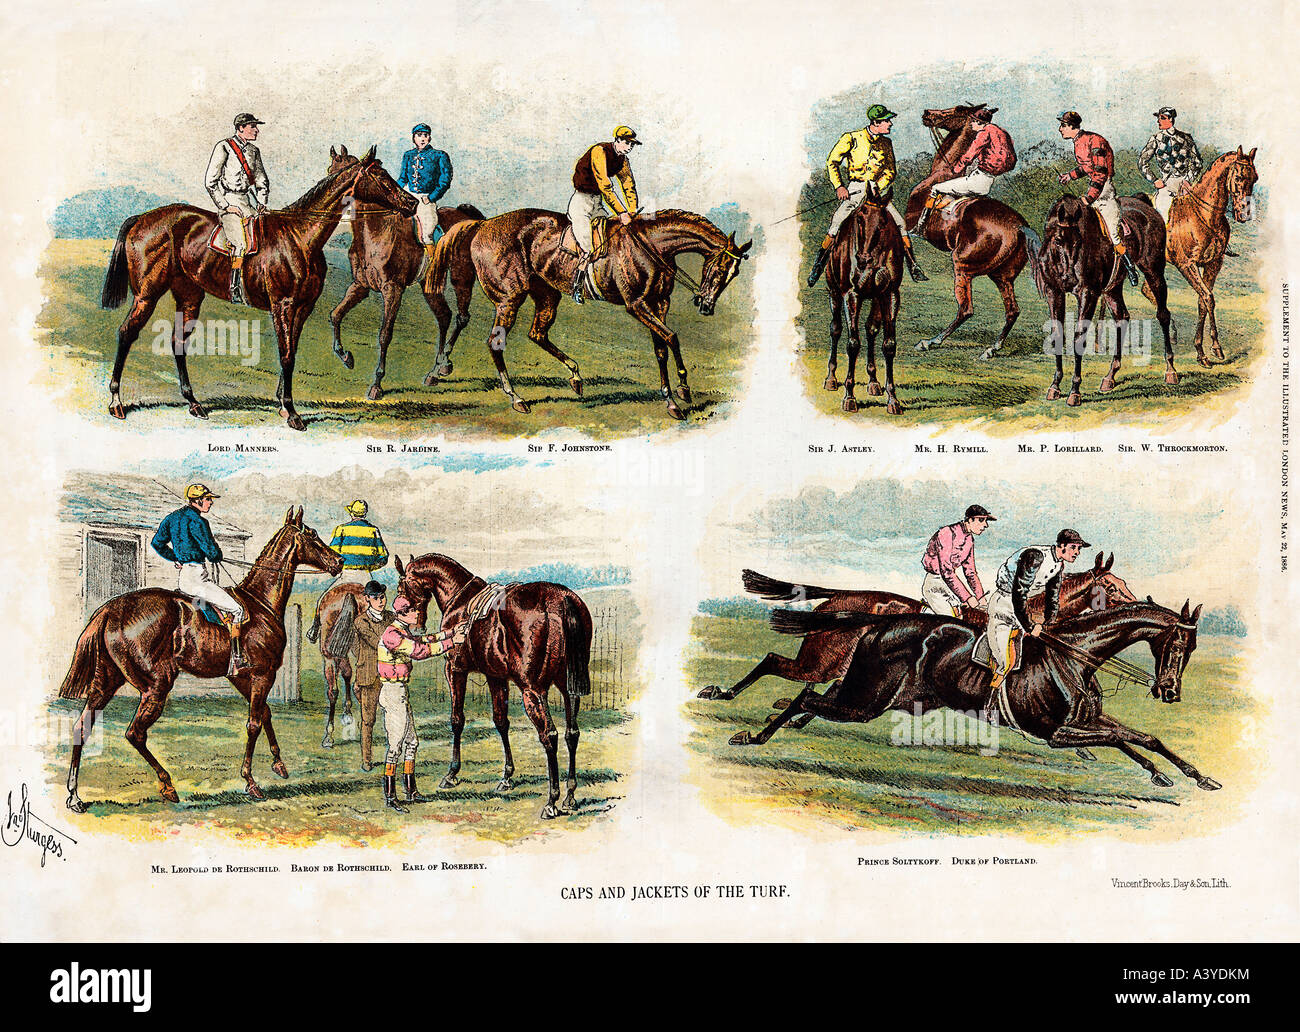 Caps and Jackets Of The Turf 4 1886 review of the racing colours of some of the famous owners of race horses Stock Photo